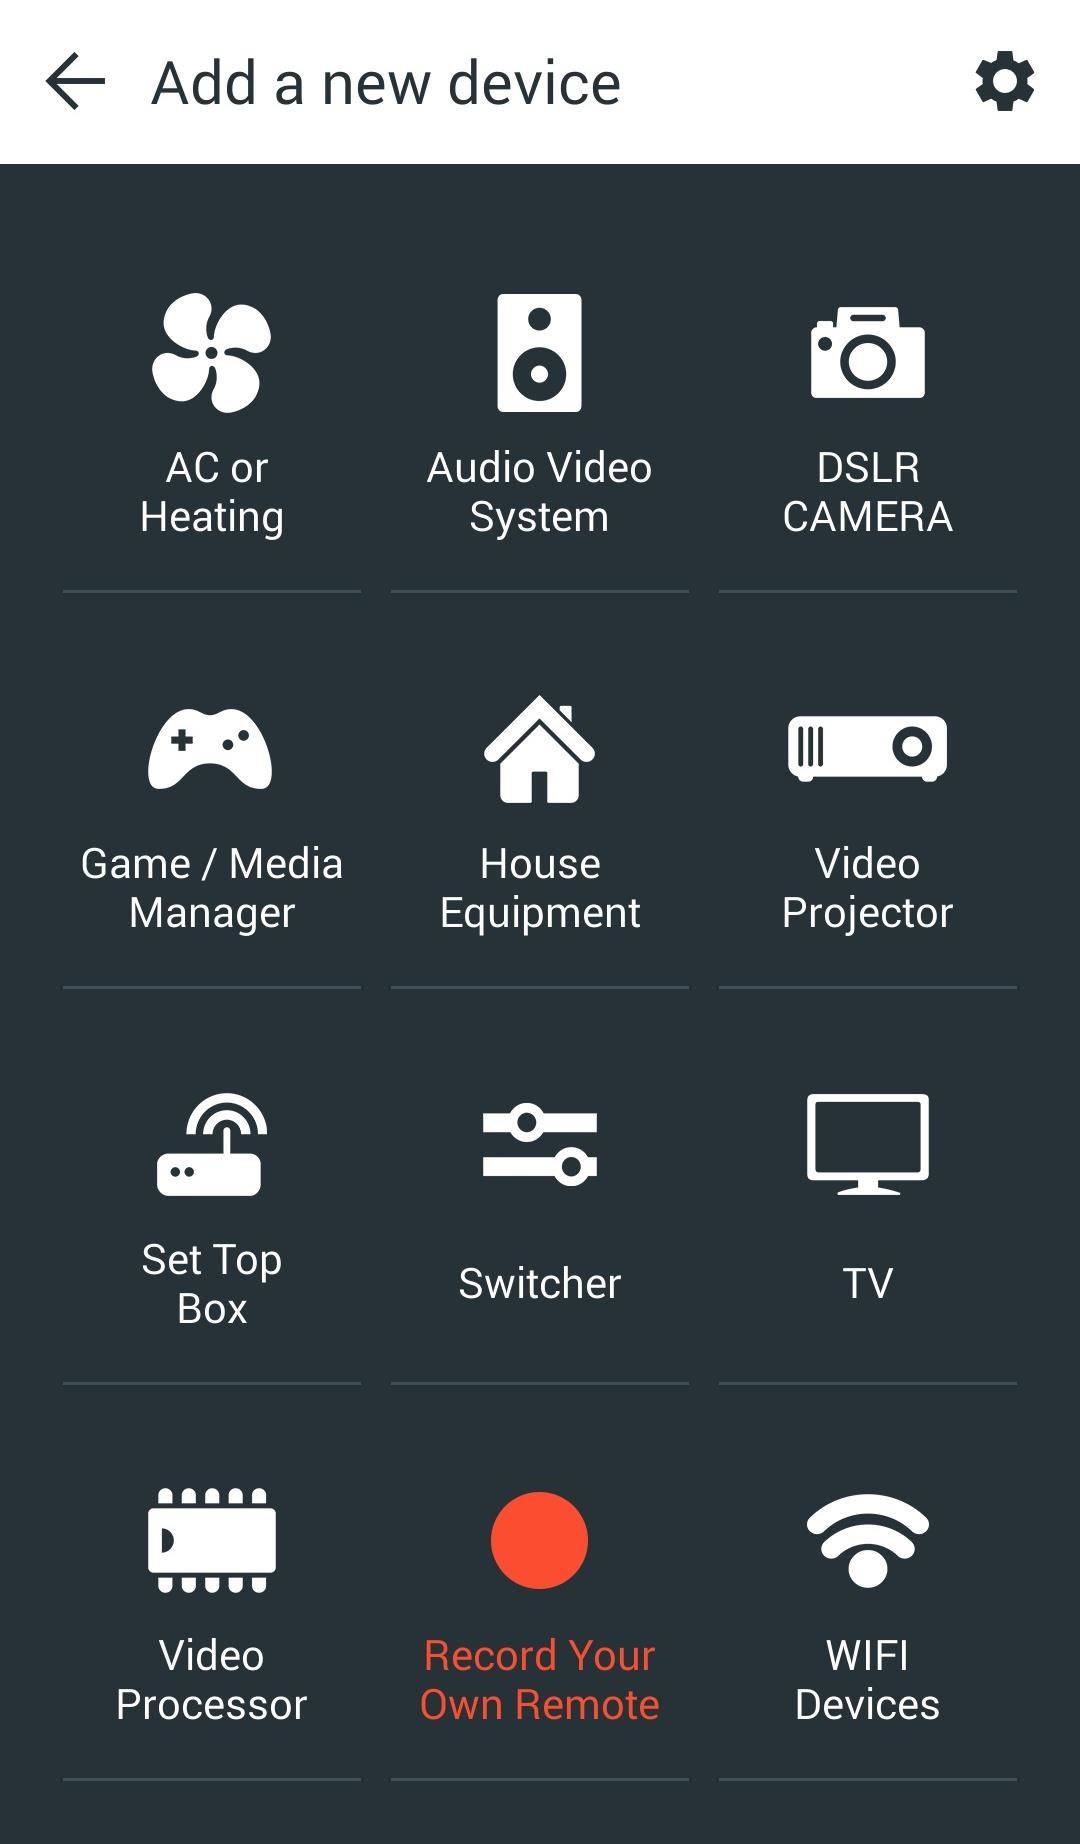 Amazon.com: tv remote: Appstore for Android